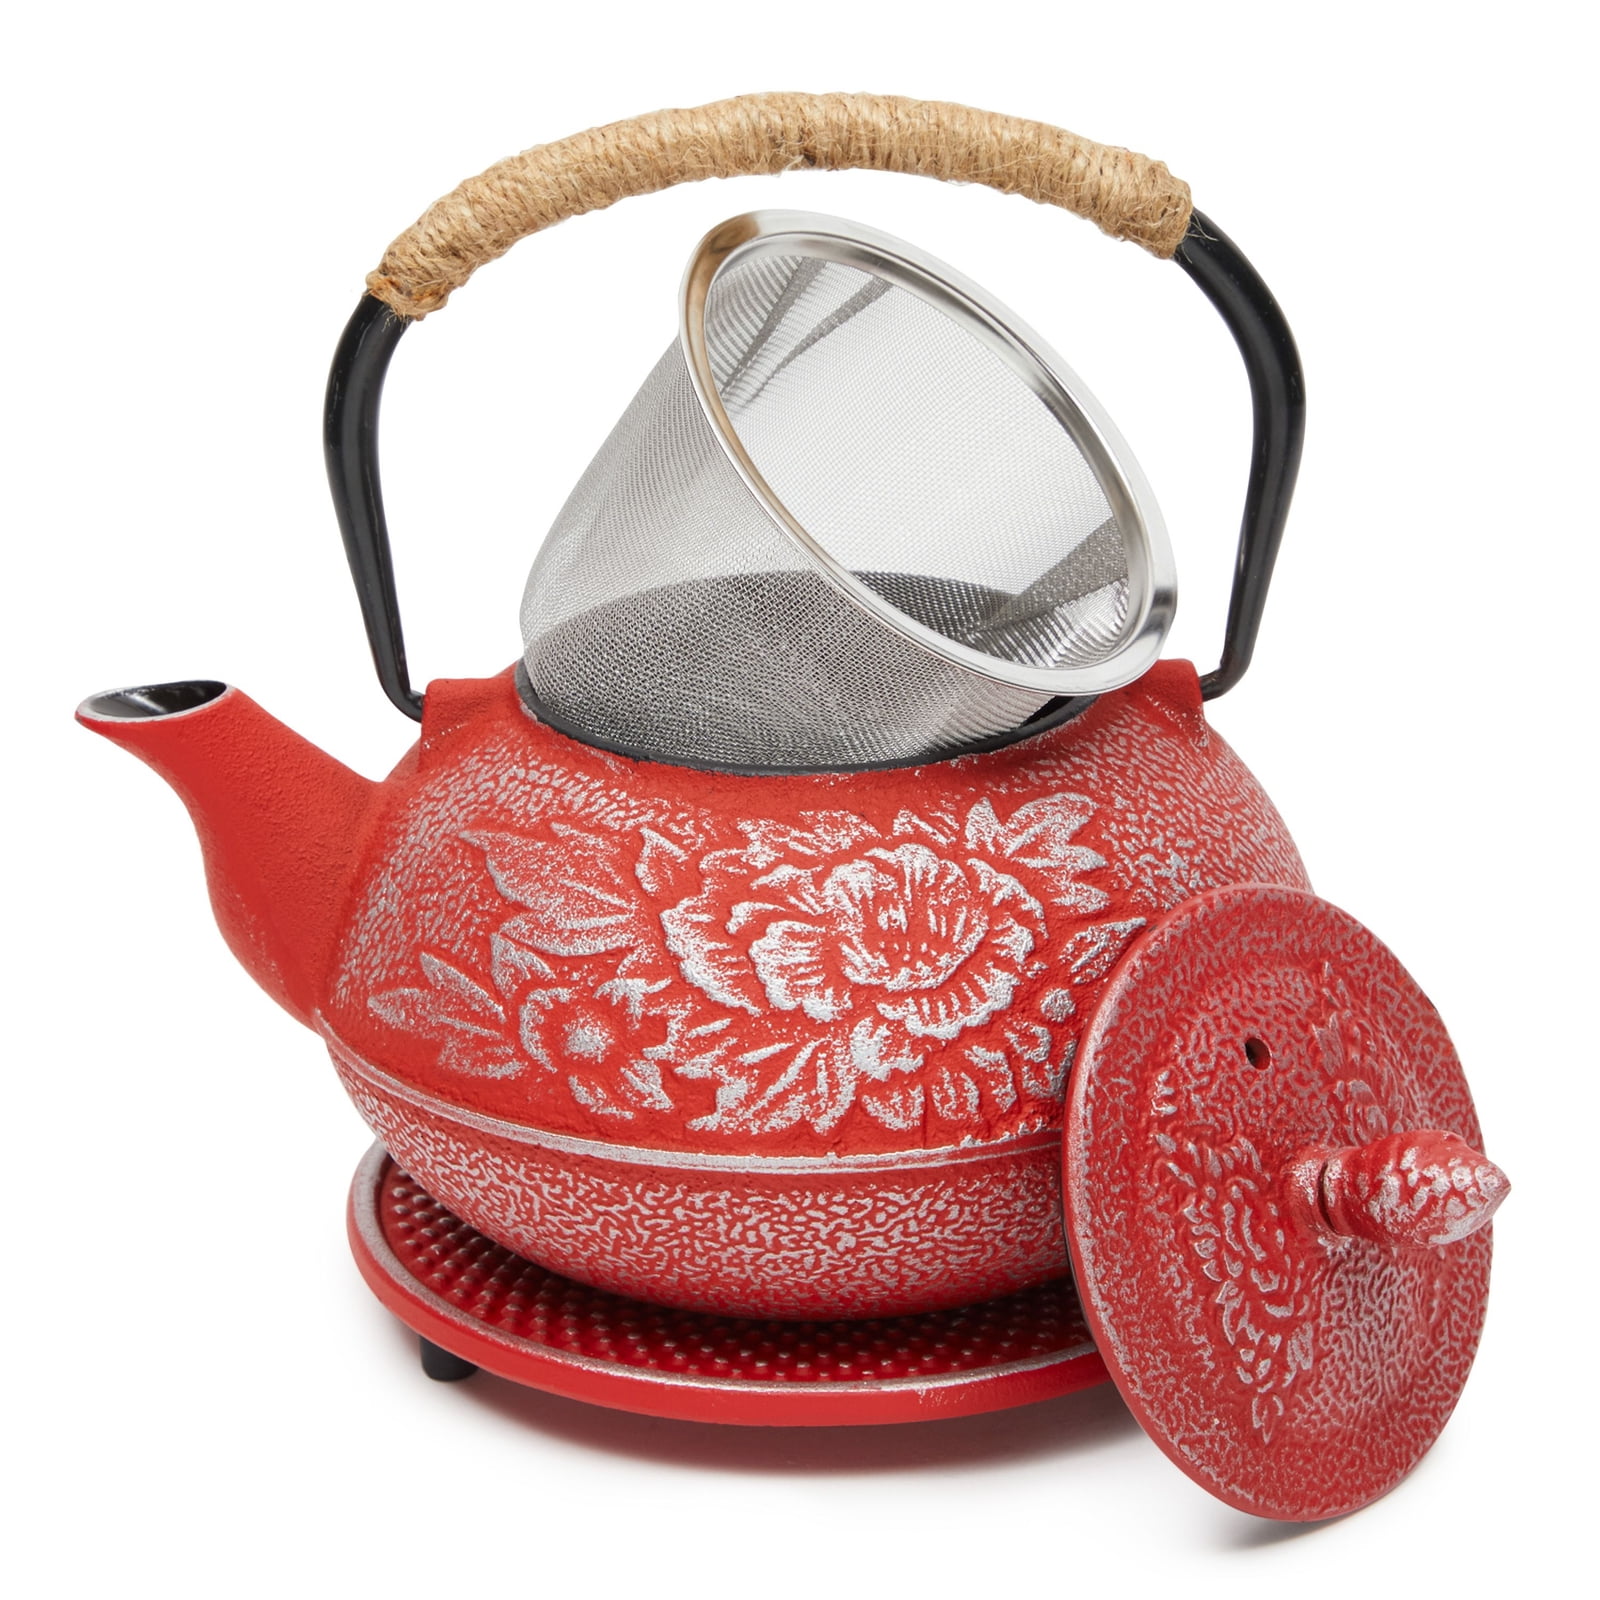 900ml Cast Iron Teapot Hobnail Japanese Style Tea Pot Kettle with Infuser Filter 